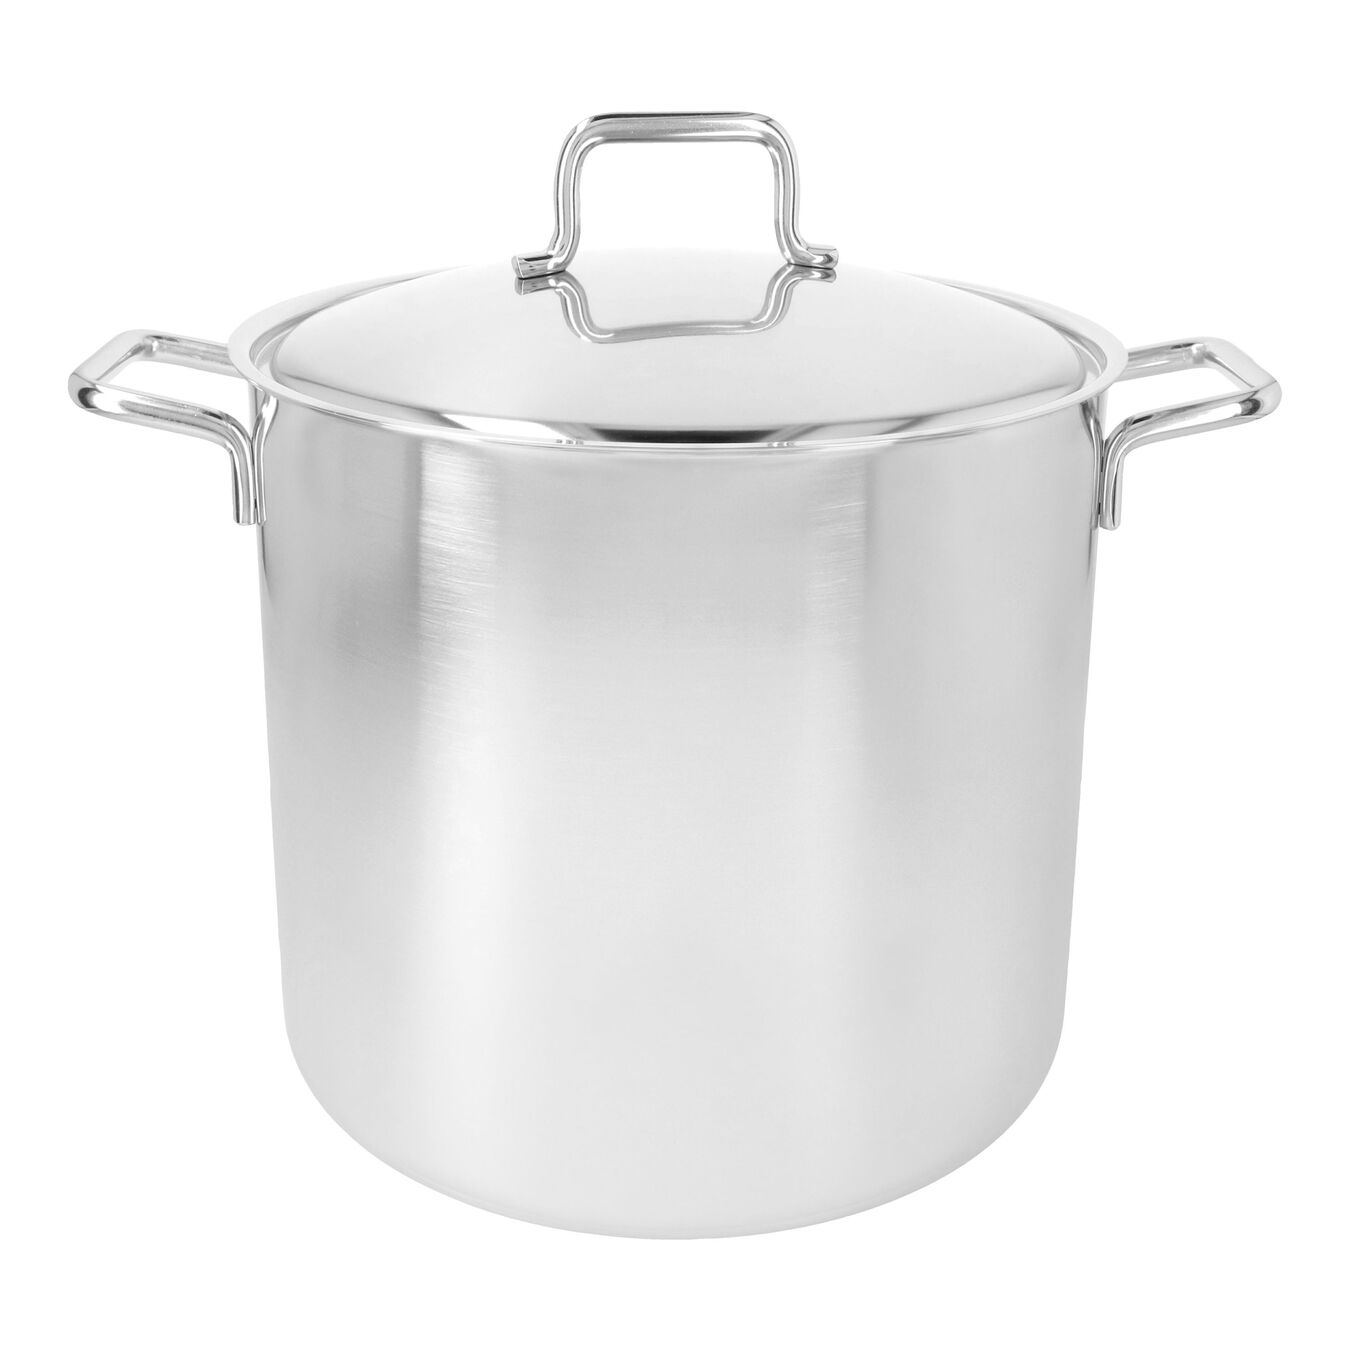 36 cm 18/10 Stainless Steel Stock pot with lid silver,,large 1